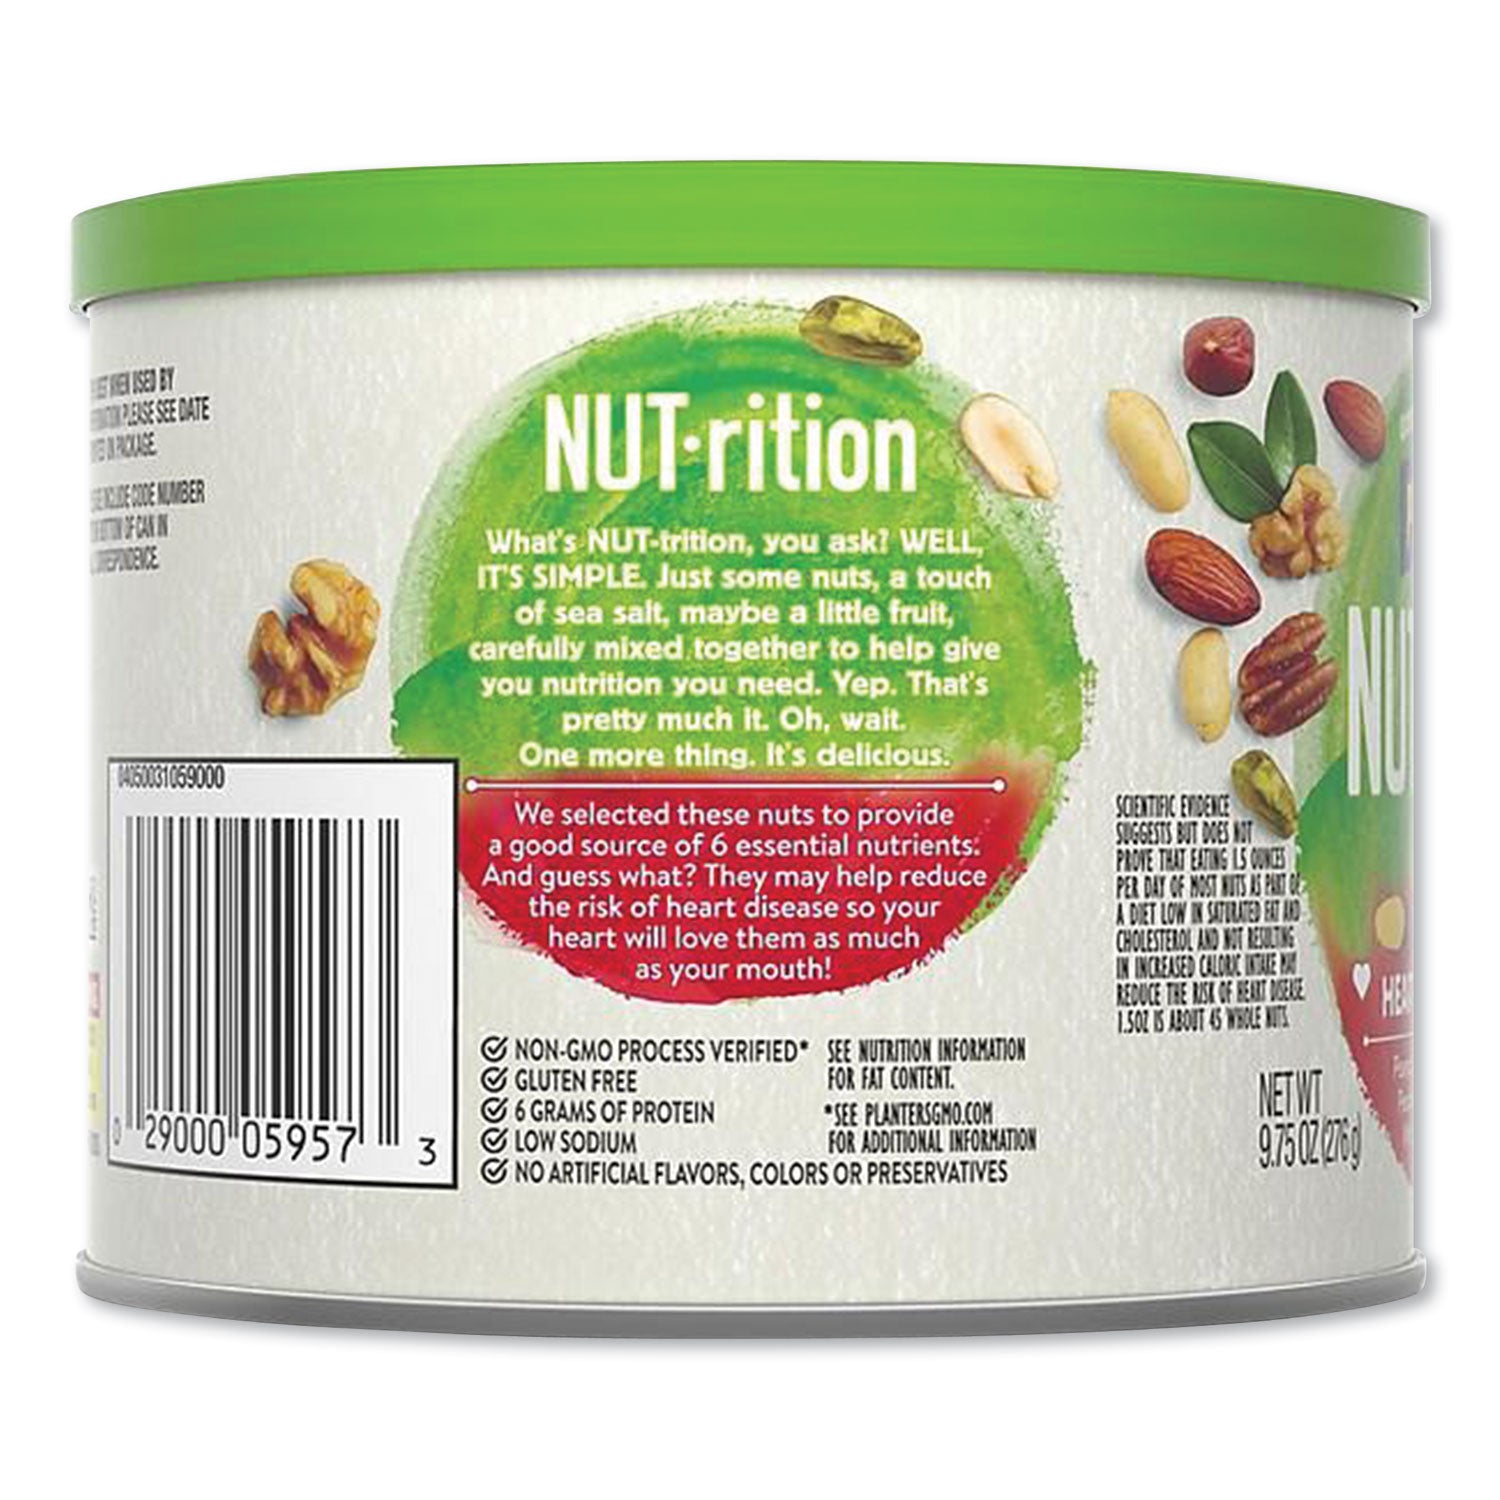 nut-rition-heart-healthy-mix-975-oz-can_ptn05957 - 4